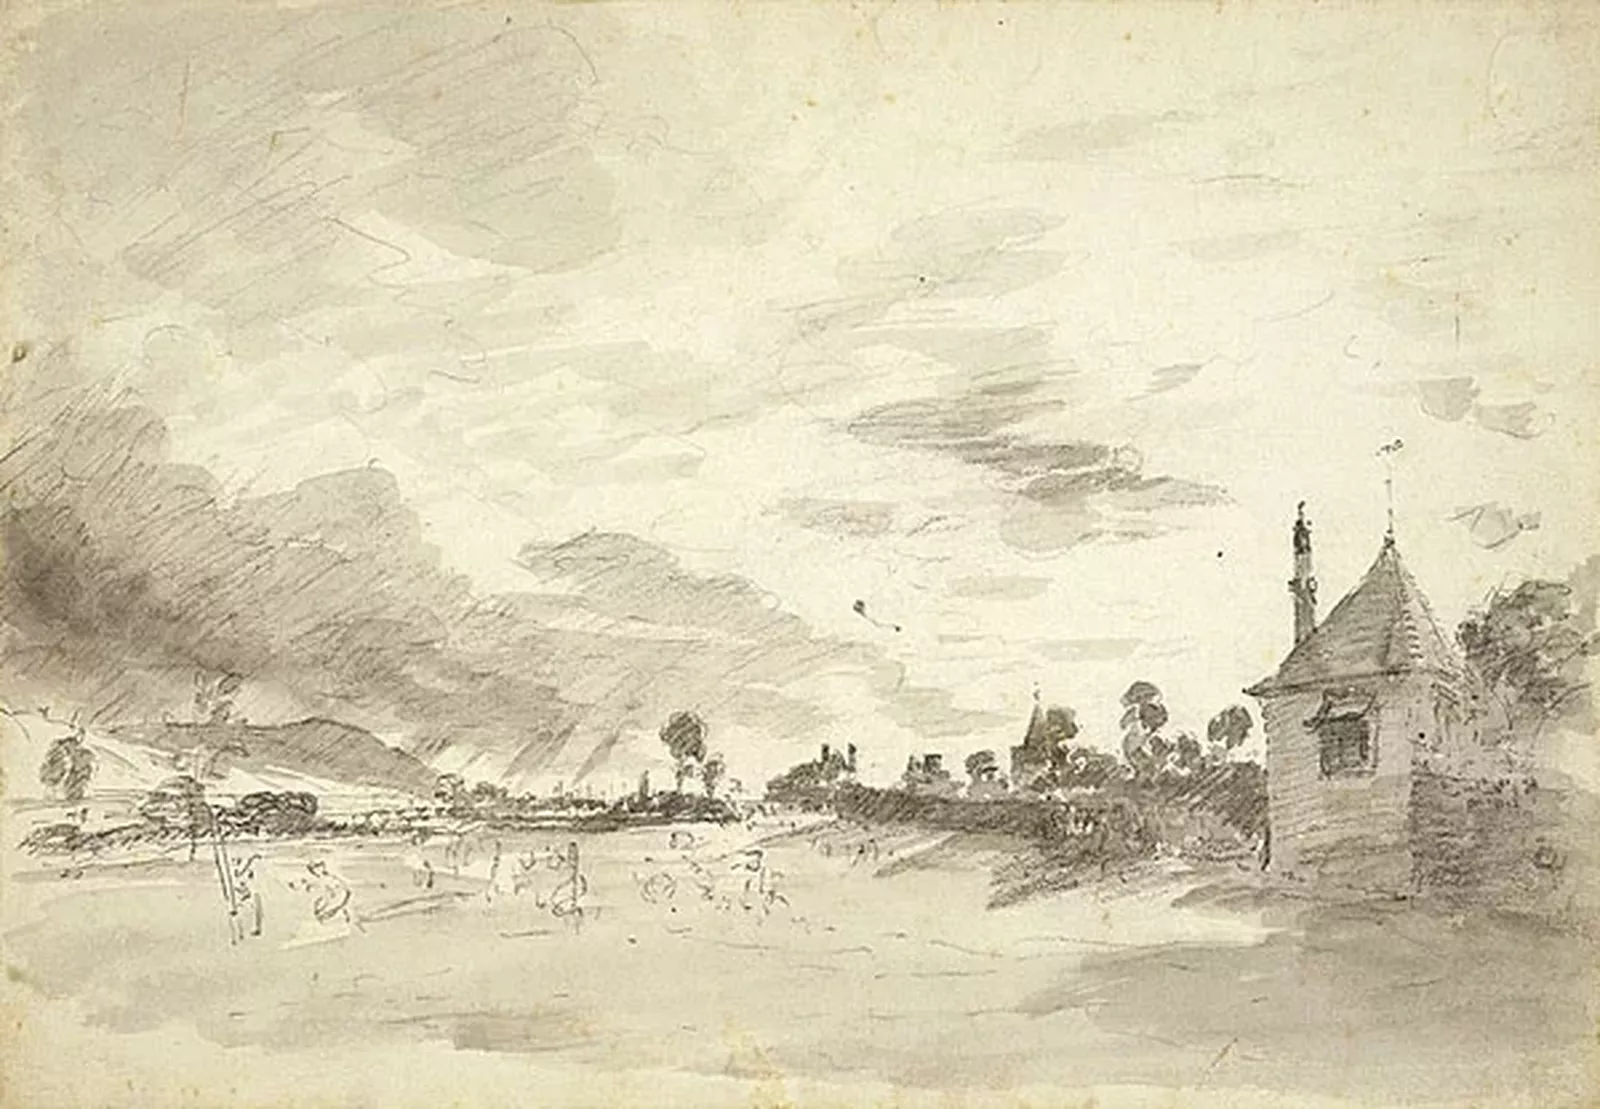 A black and white sketch of a landscape with one building with storm clouds overhead